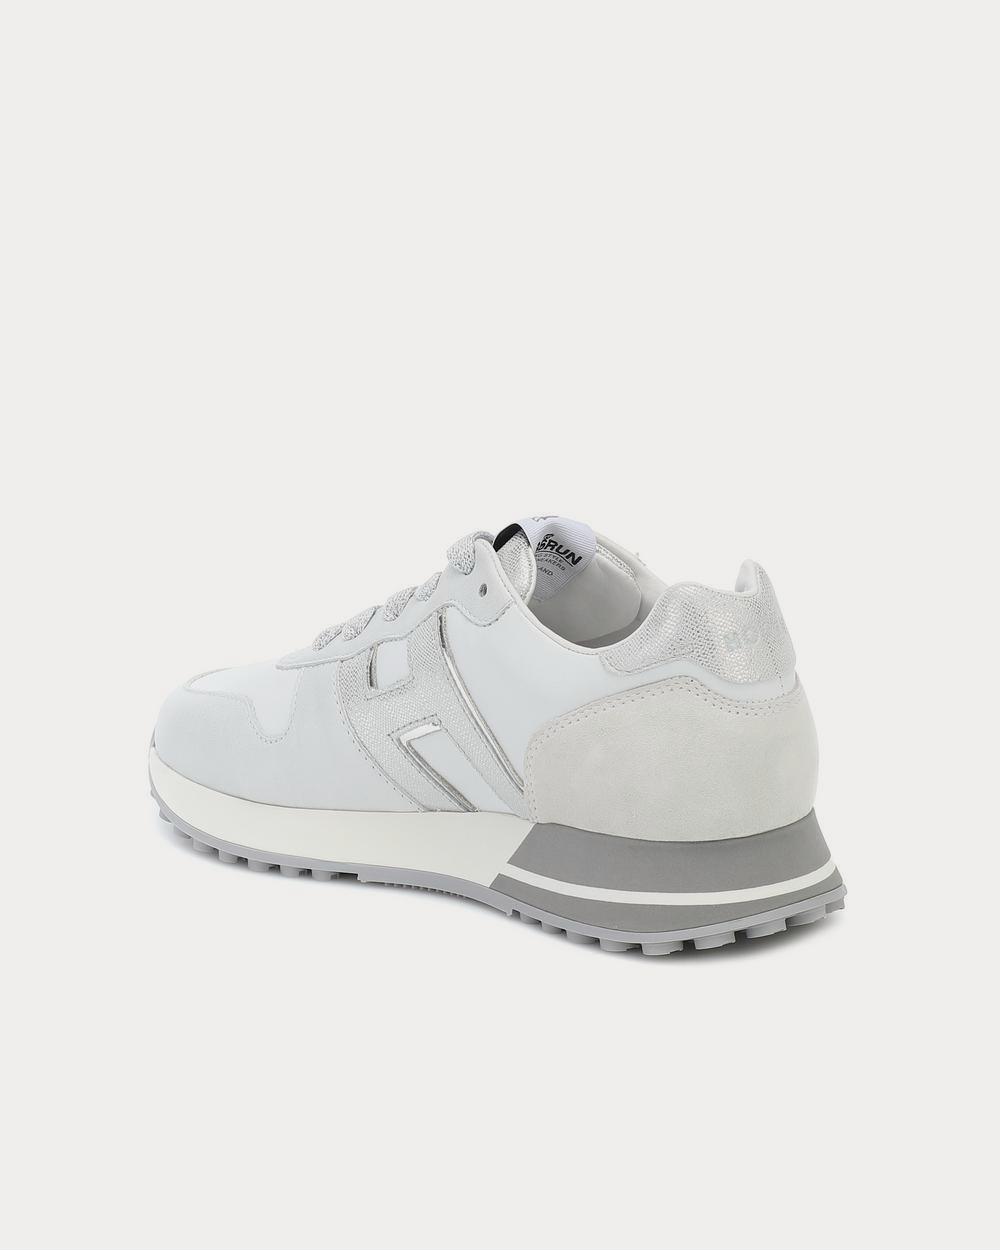 Hogan - H383 leather Bianco Argento Low Top Sneakers